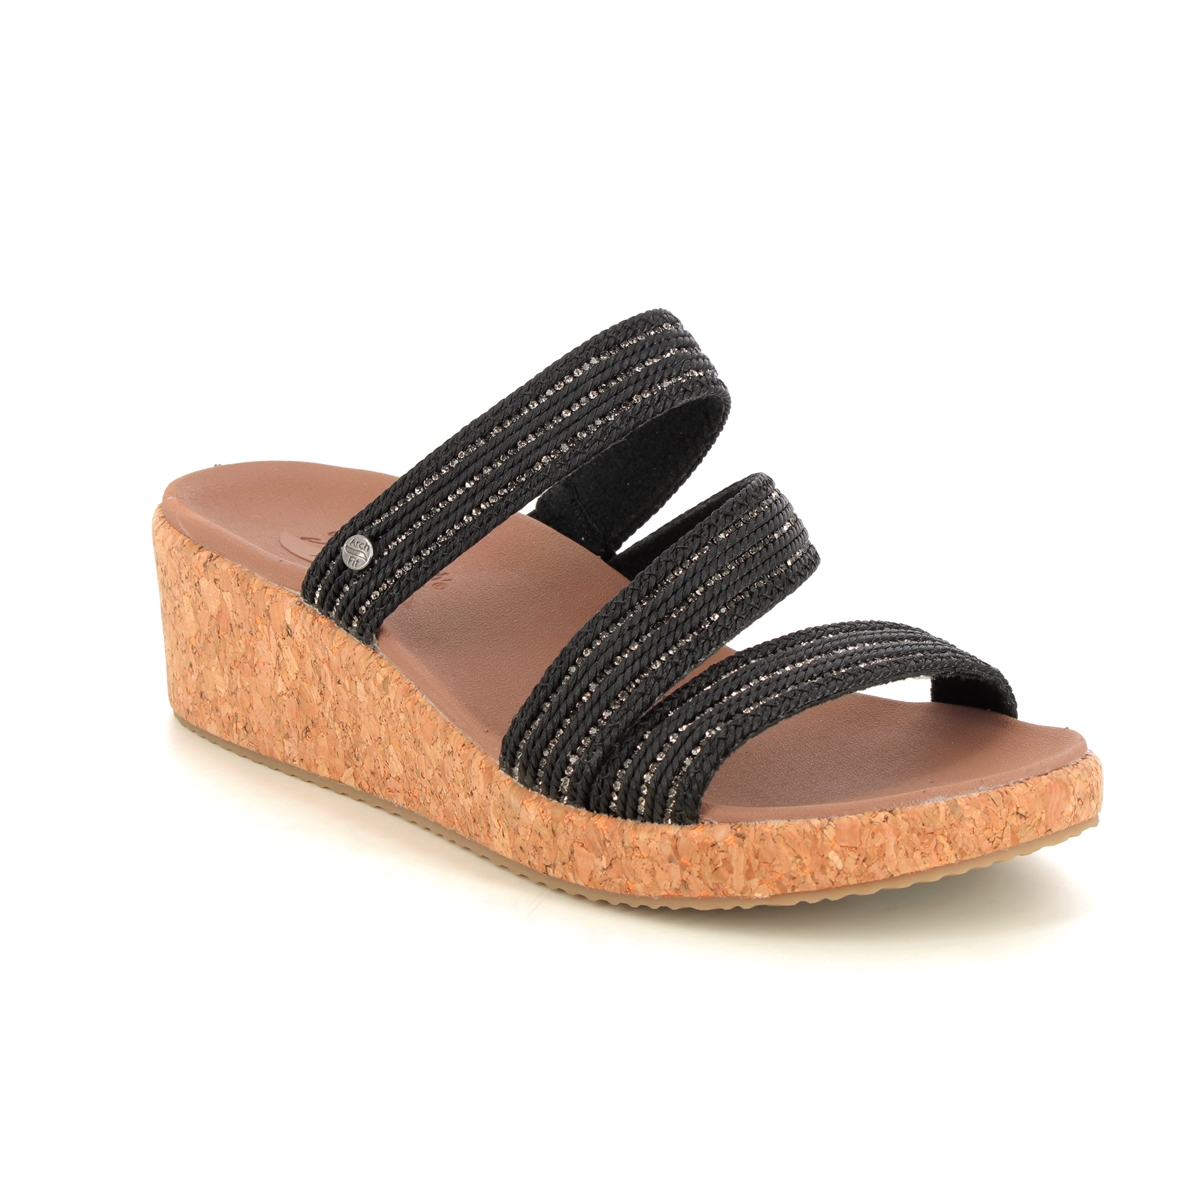 Skechers Arch Fit Beverlee BLK Black Womens Wedge Sandals 119548 in a Plain Textile in Size 5